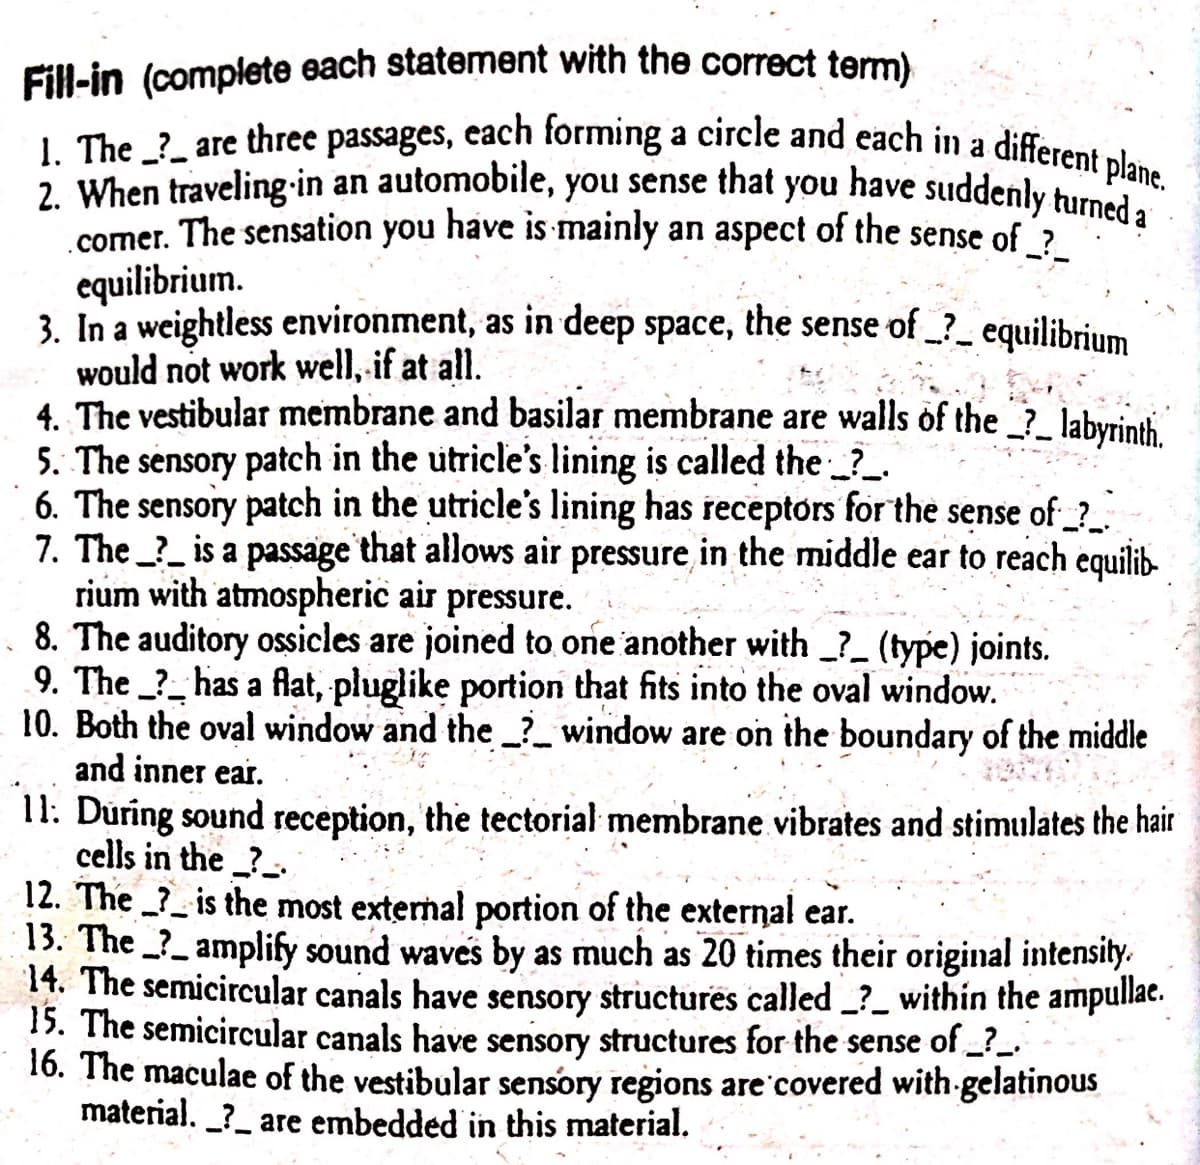 Fill-in (complete each statement with the correct term)
1. The ? are three passages, each forming a circle and each in a different plane.
2. When traveling in an automobile, you sense that you have suddenly turned a
comer. The sensation you have is mainly an aspect of the sense of_?_
equilibrium.
3. In a weightless environment, as in deep space, the sense of_?__ equilibrium
would not work well, if at all.
4. The vestibular membrane and basilar membrane are walls of the _?_ labyrinth.
5. The sensory patch in the utricle's lining is called the ____
6. The sensory patch in the utricle's lining has receptors for the sense of___
7. The _?_ is a passage that allows air pressure in the middle ear to reach equilib-
rium with atmospheric air pressure.
8. The auditory ossicles are joined to one another with _?_ (type) joints.
9. The ? has a flat, pluglike portion that fits into the oval window.
10. Both the oval window and the _?__ window are on the boundary of the middle
and inner ear.
11. During sound reception, the tectorial membrane vibrates and stimulates the hair
cells in the_?_
12. The
is the most external portion of the external ear.
13. The amplify sound waves by as much as 20 times their original intensity.
14. The semicircular canals have sensory structures called _?_ within the ampullae.
15. The semicircular canals have sensory structures for the sense of __?__
16. The maculae of the vestibular sensory regions are covered with gelatinous
material. _?_ are embedded in this material.